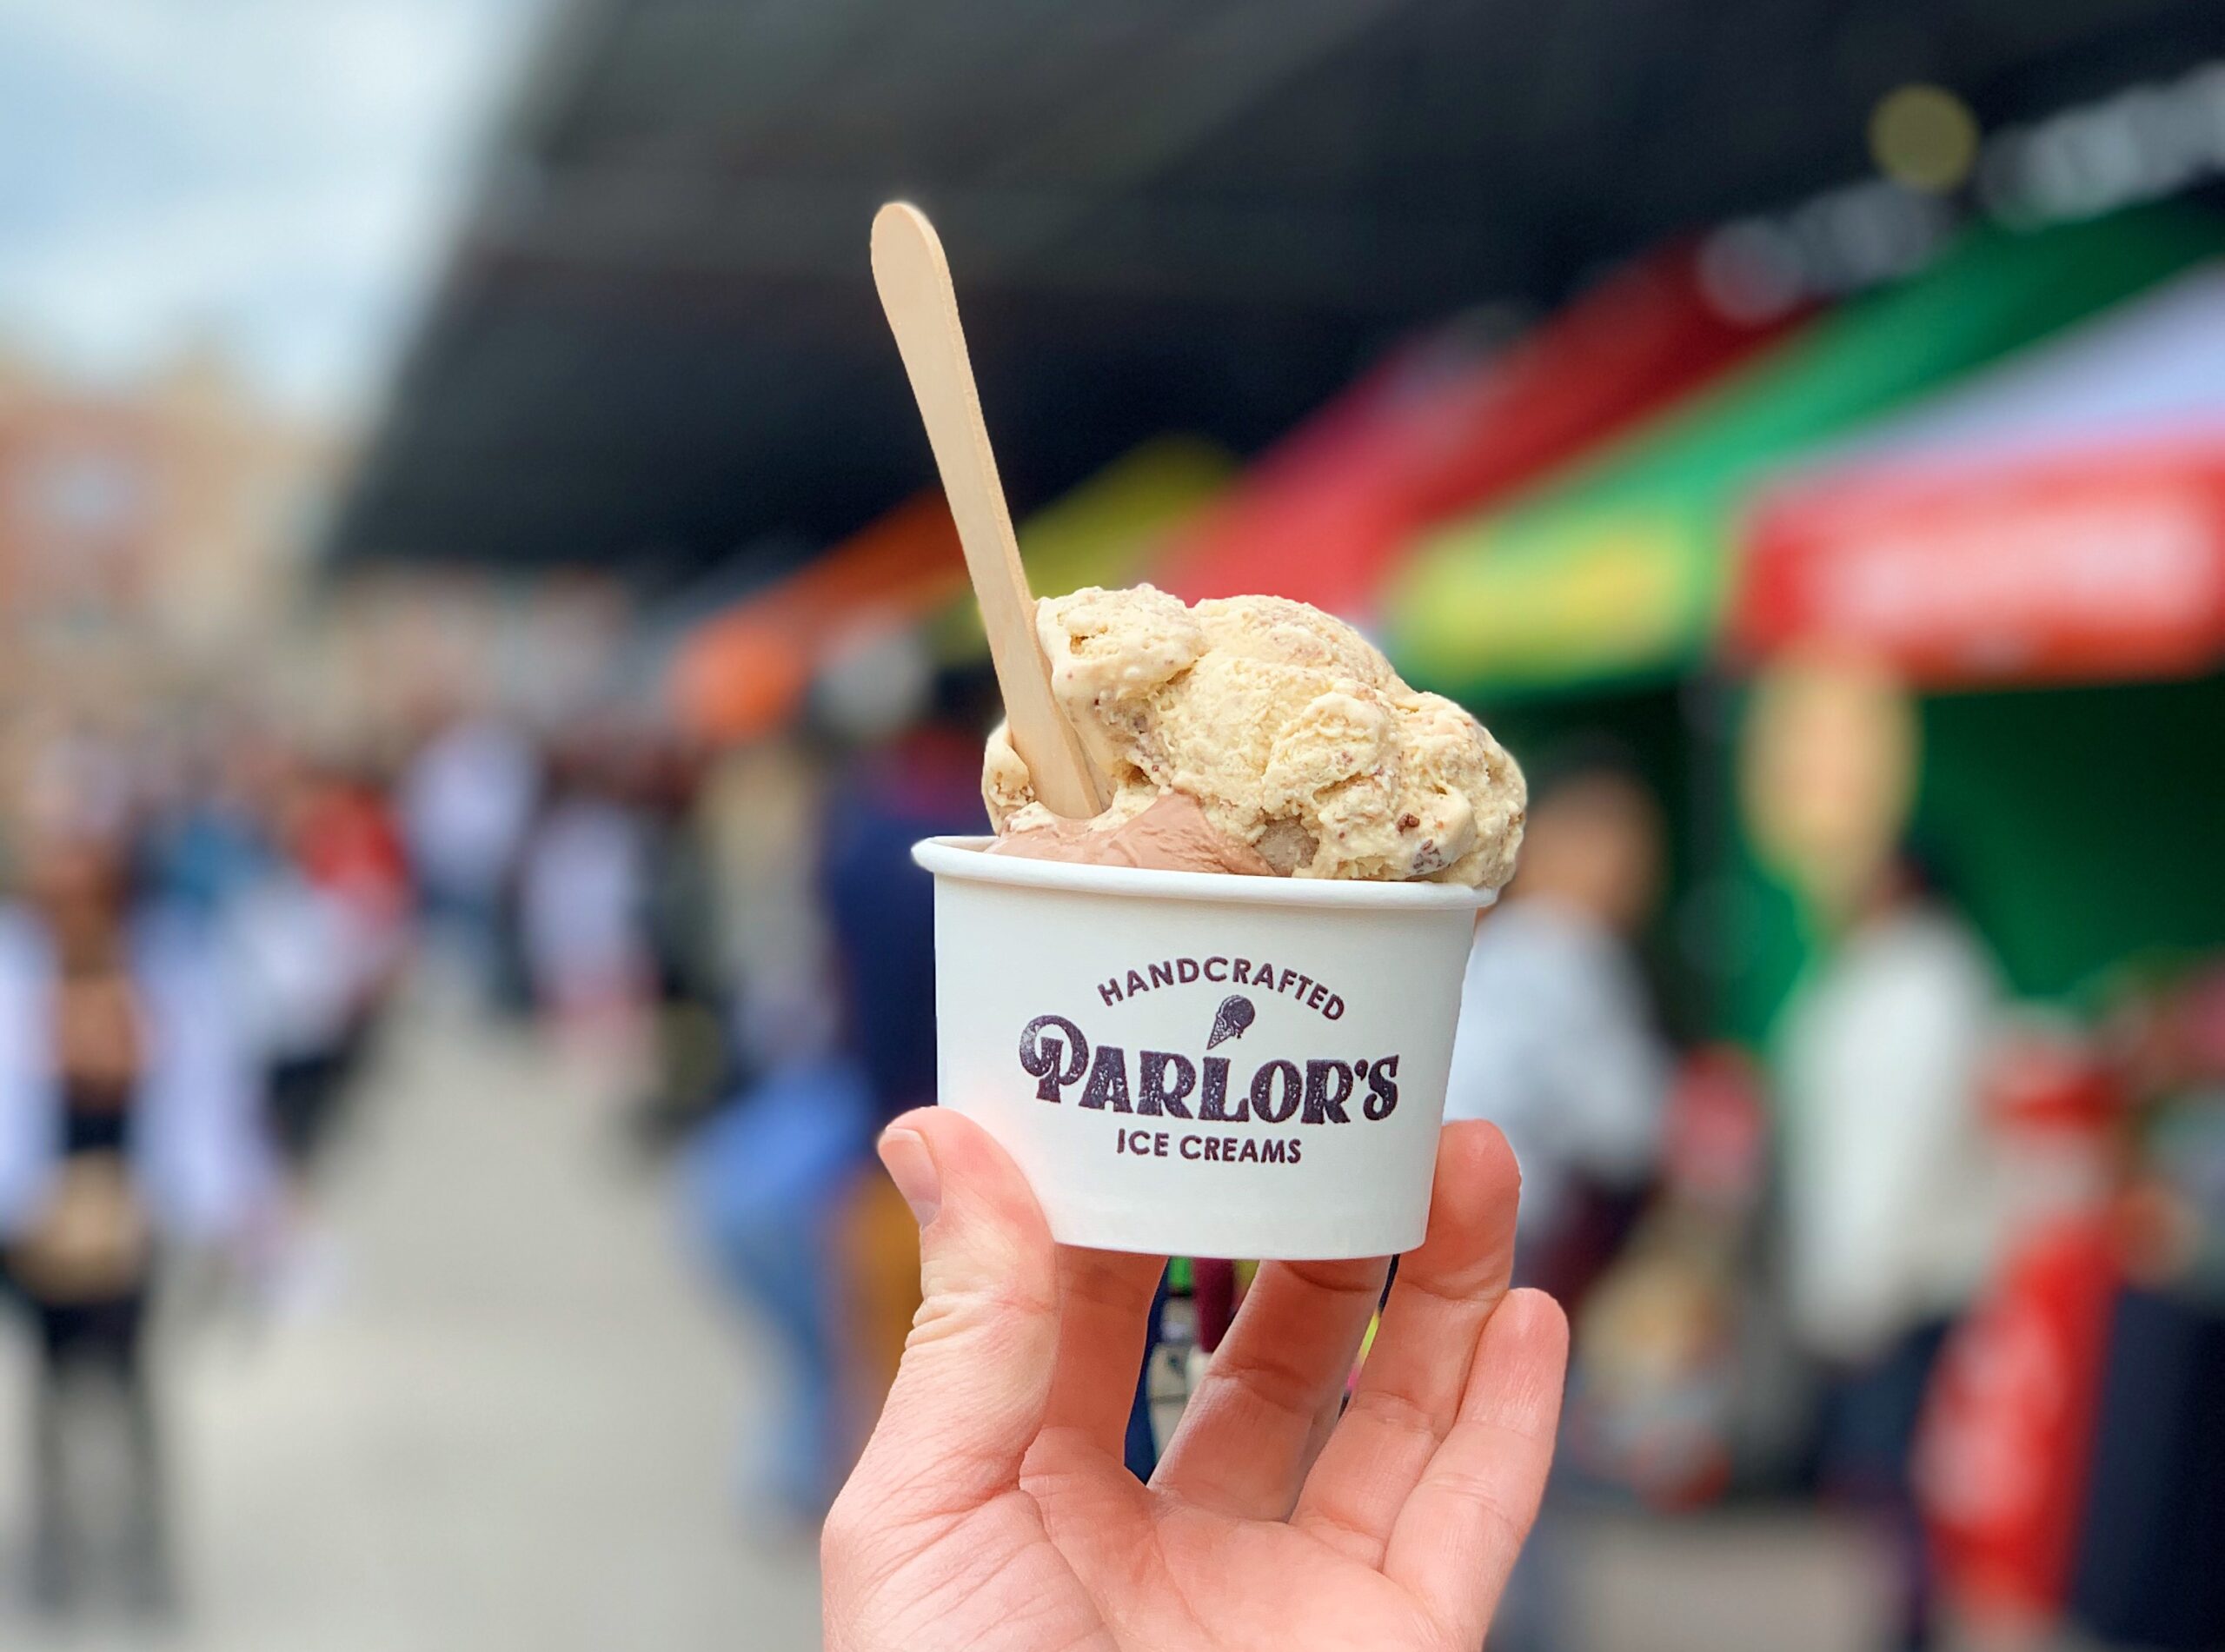 A scoop of Parlor's Handcrafted Ice Cream in a cup.